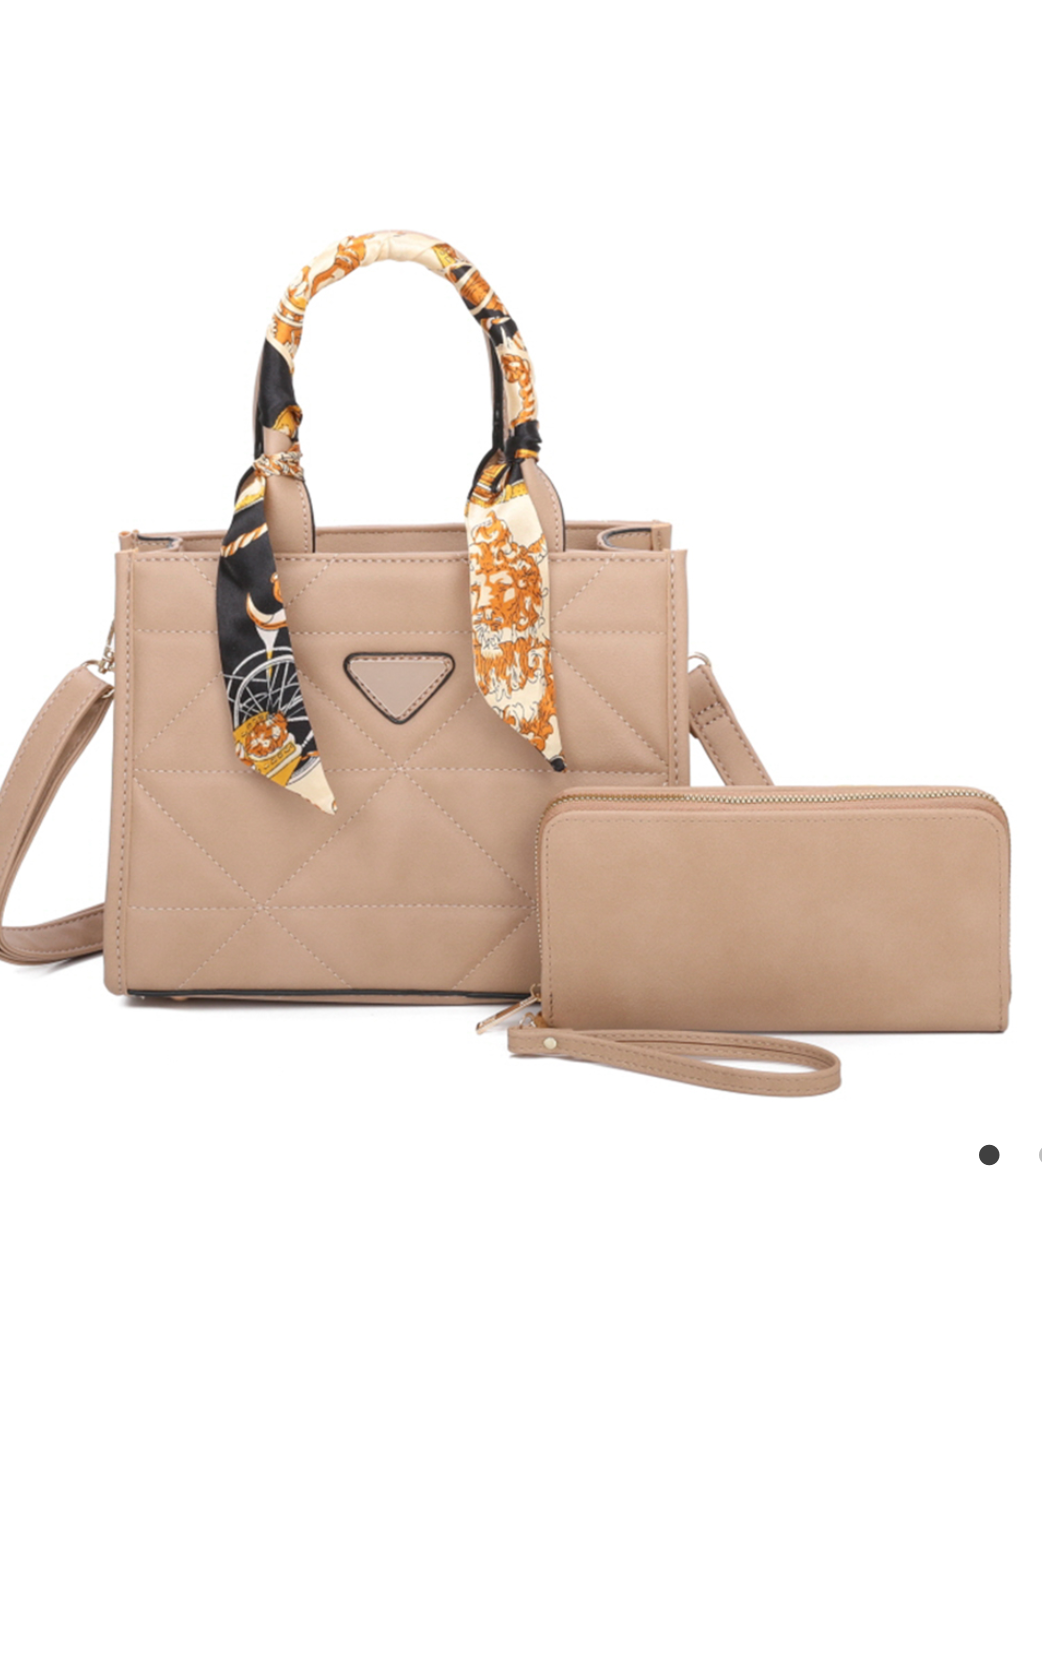 Not My Problem Purse in Nude - ShopSpoiled